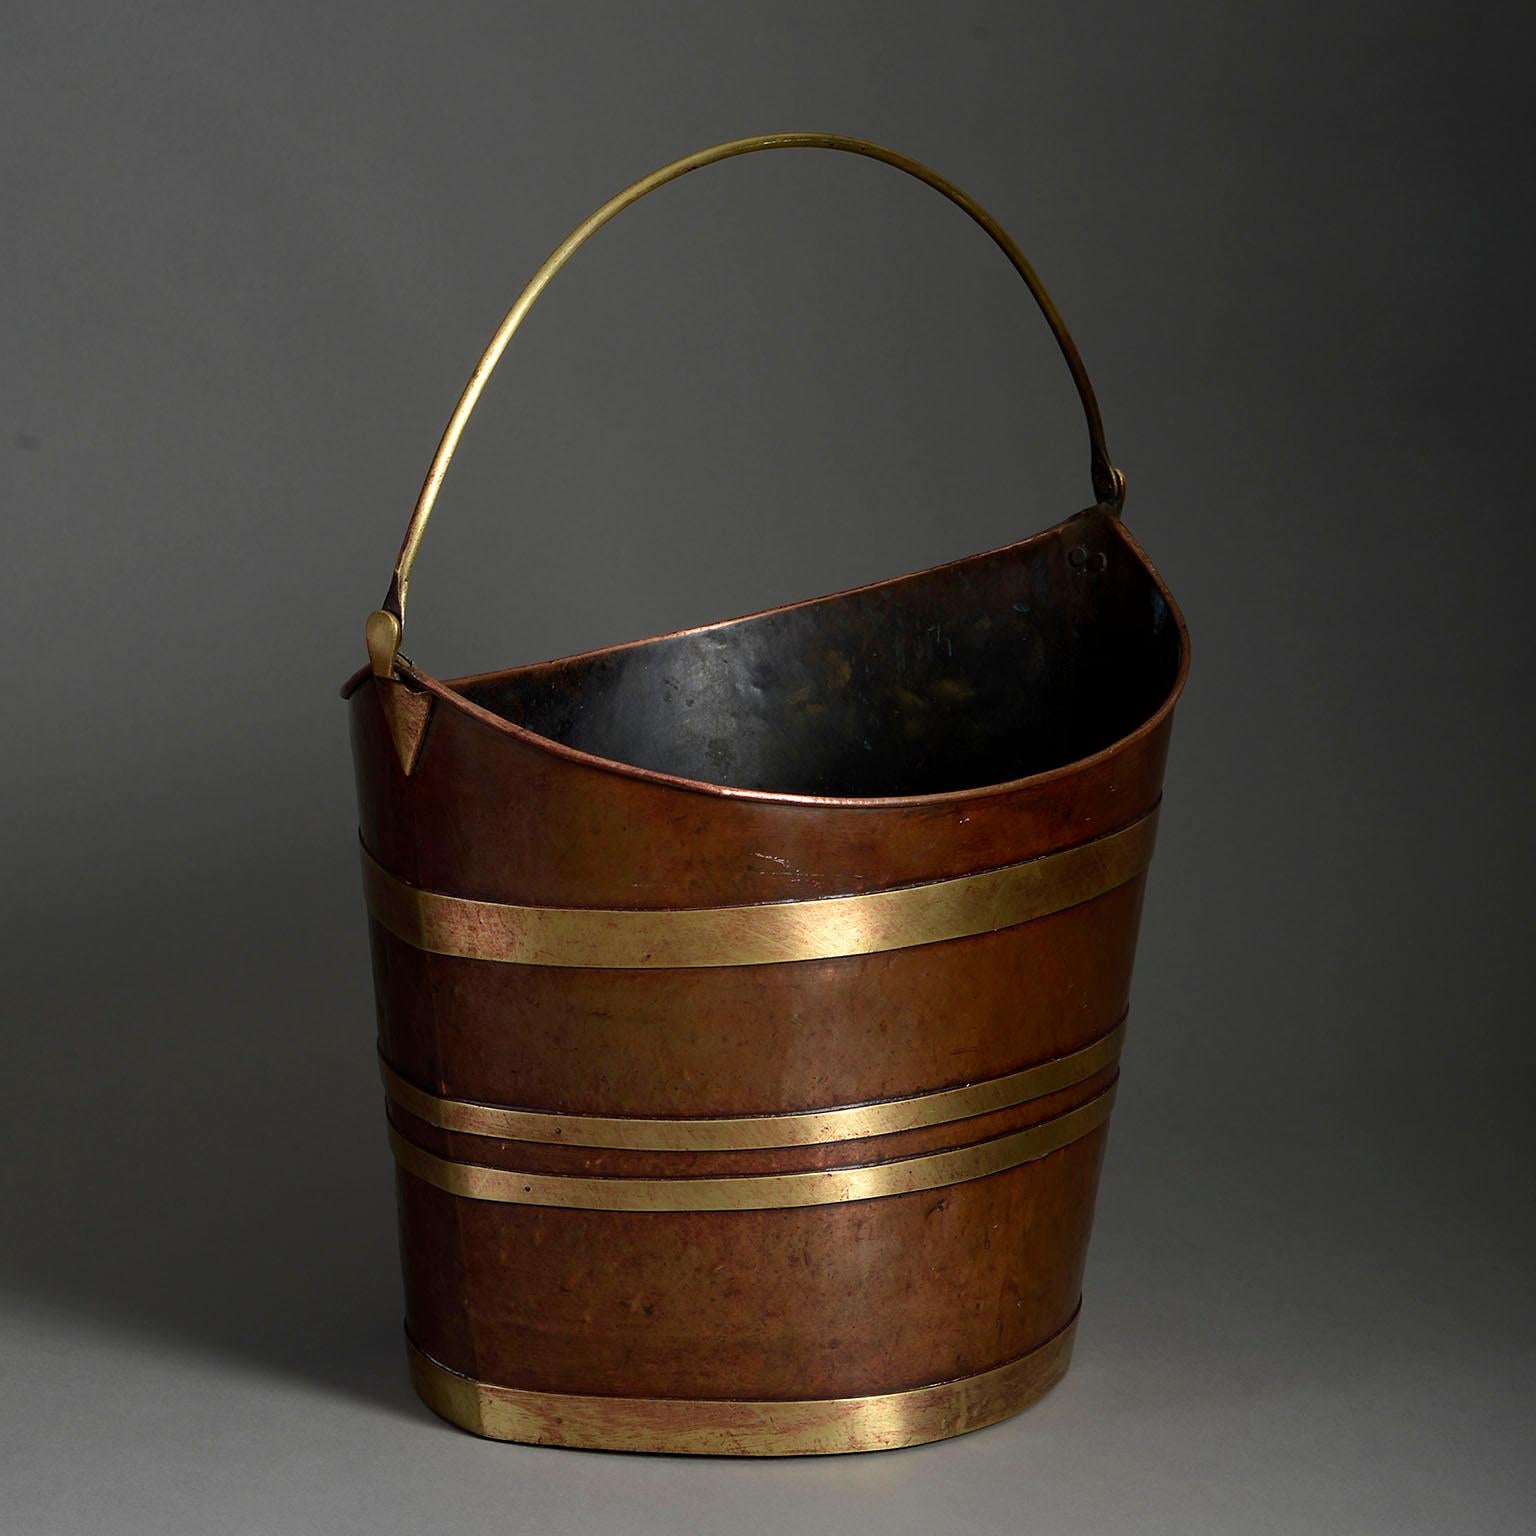 An early nineteenth century Regency Period brass bound copper peat bucket, of schooner form, with arched carrying handle.

Height dimension refers to the point at which the handle connects to the bucket.

Circa 1820 England

Dimensions: 15.5 W